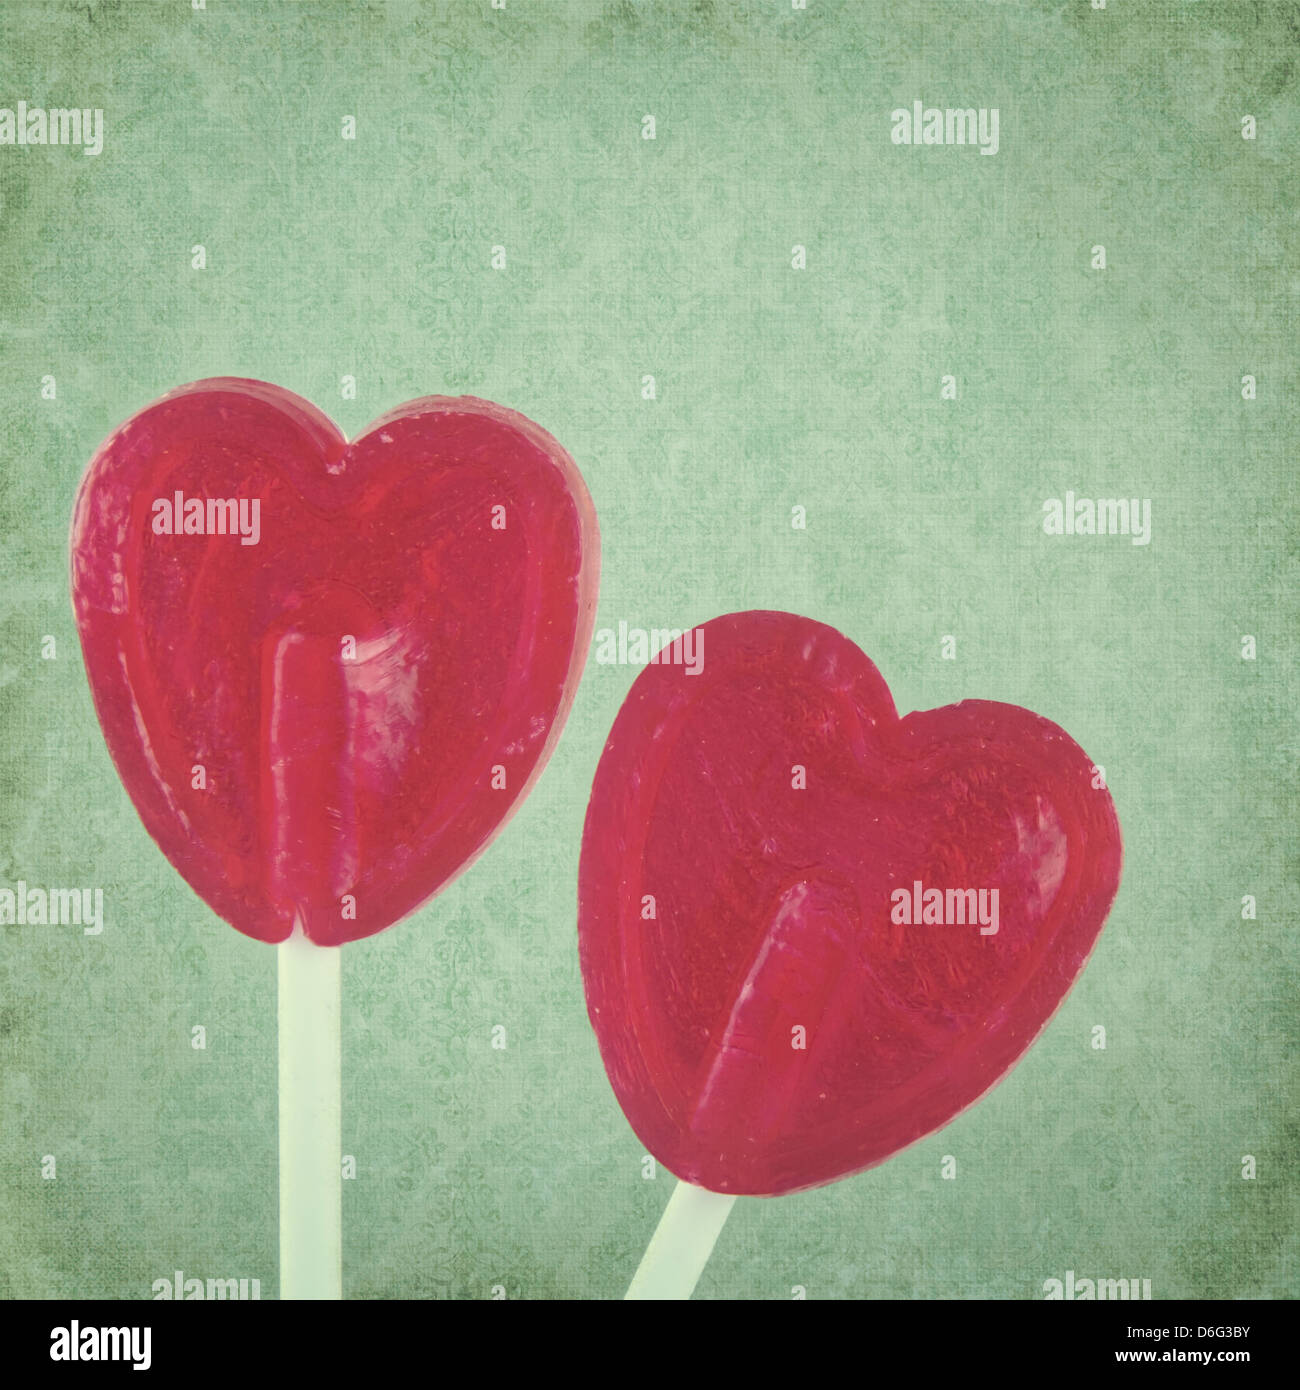 Red lollipop hearts on green vintage background Stock Photo